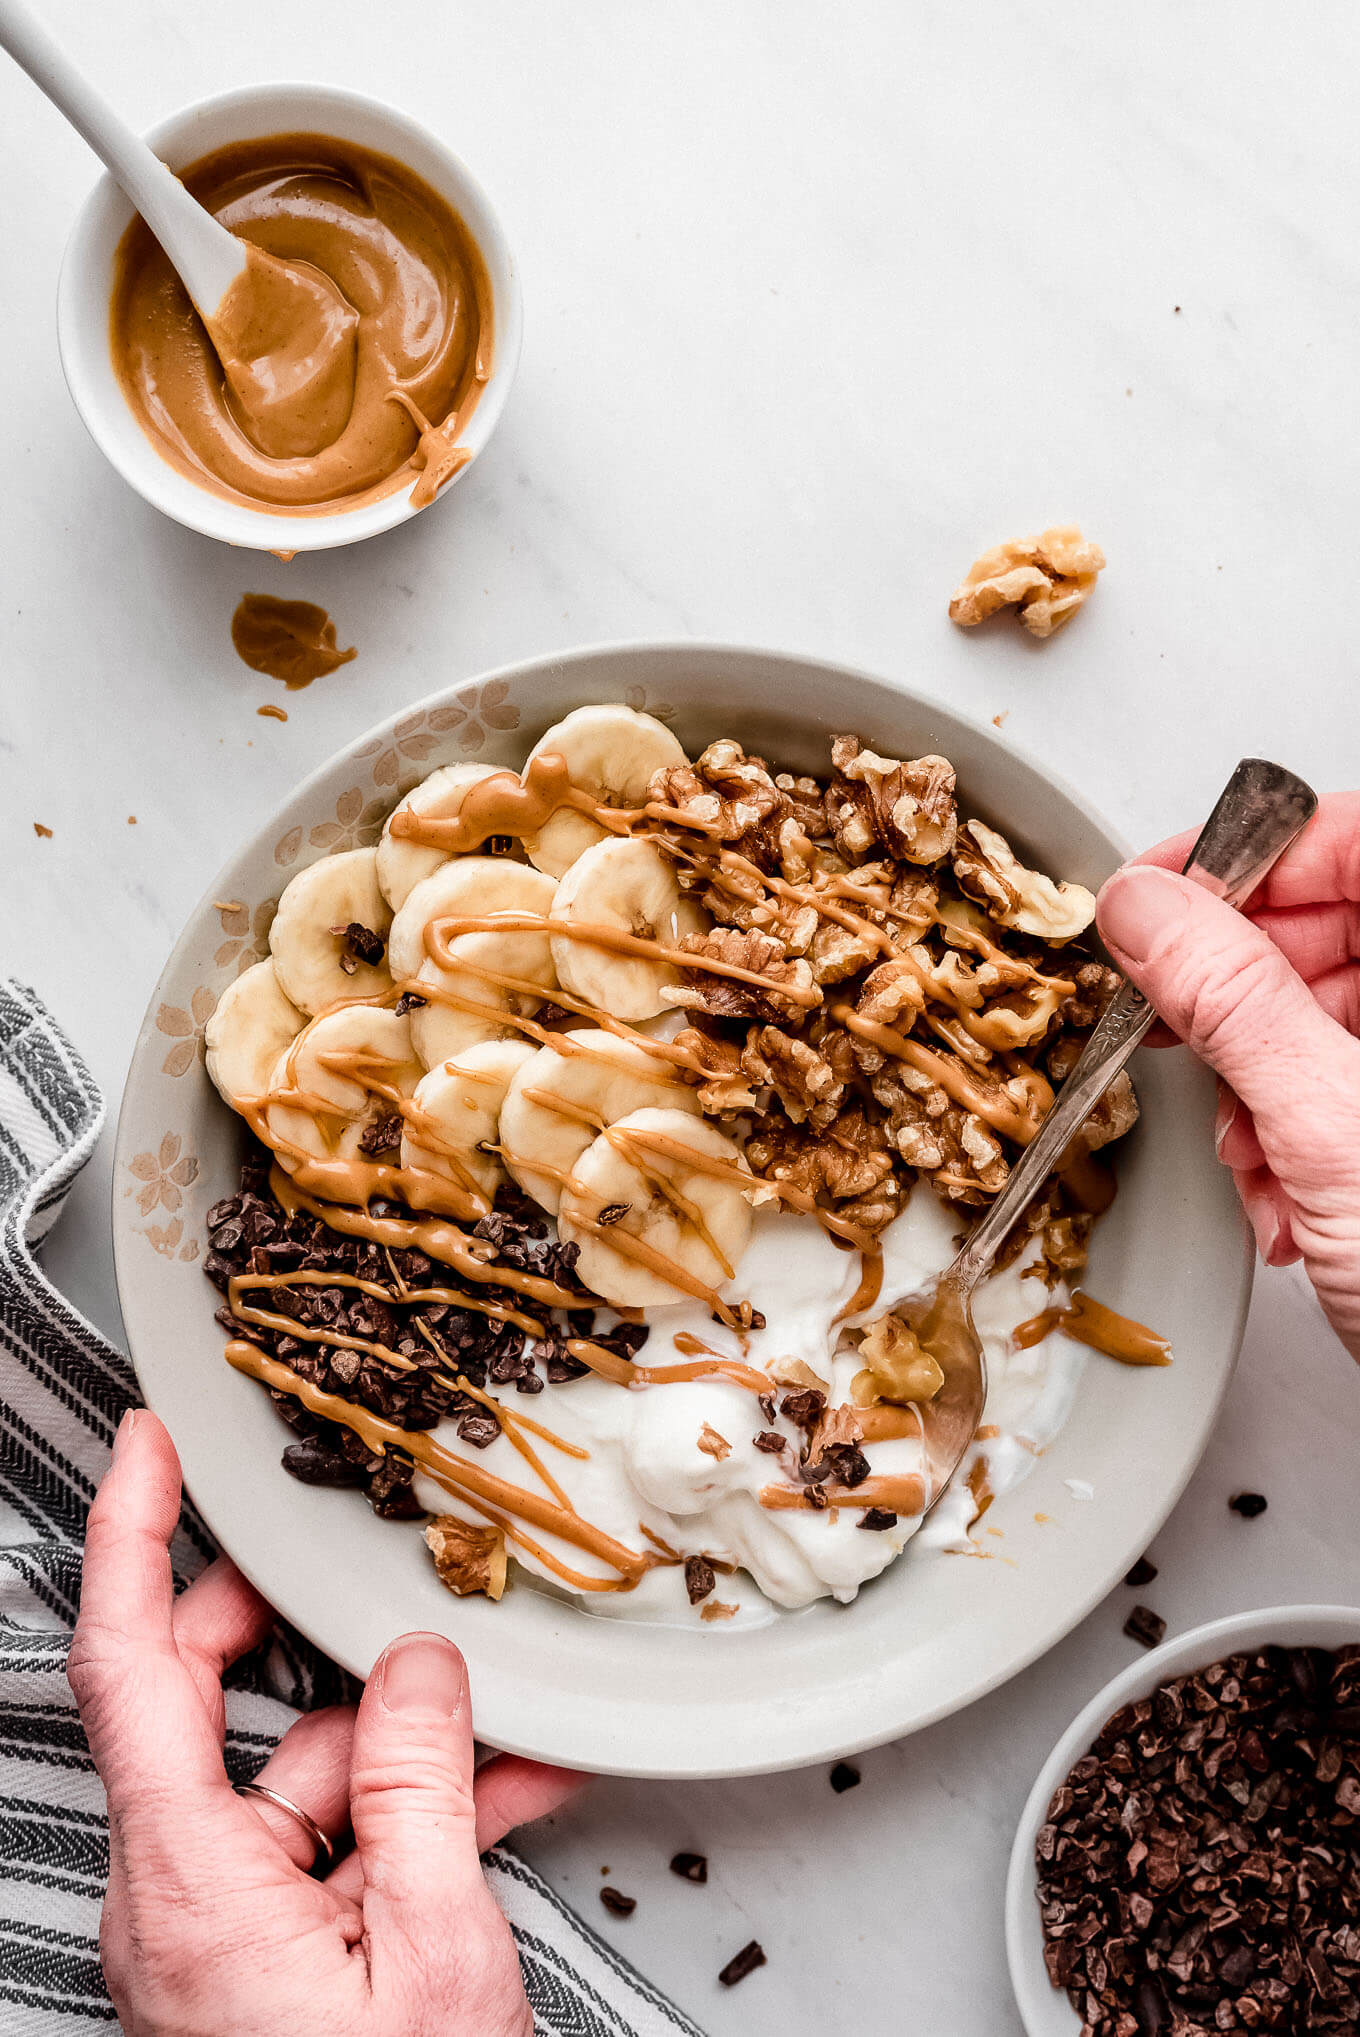 Hands holding a bowl and lifting a spoonful of yogurt from a Greek yogurt bowl topped with bananas, chocolate, and nuts.